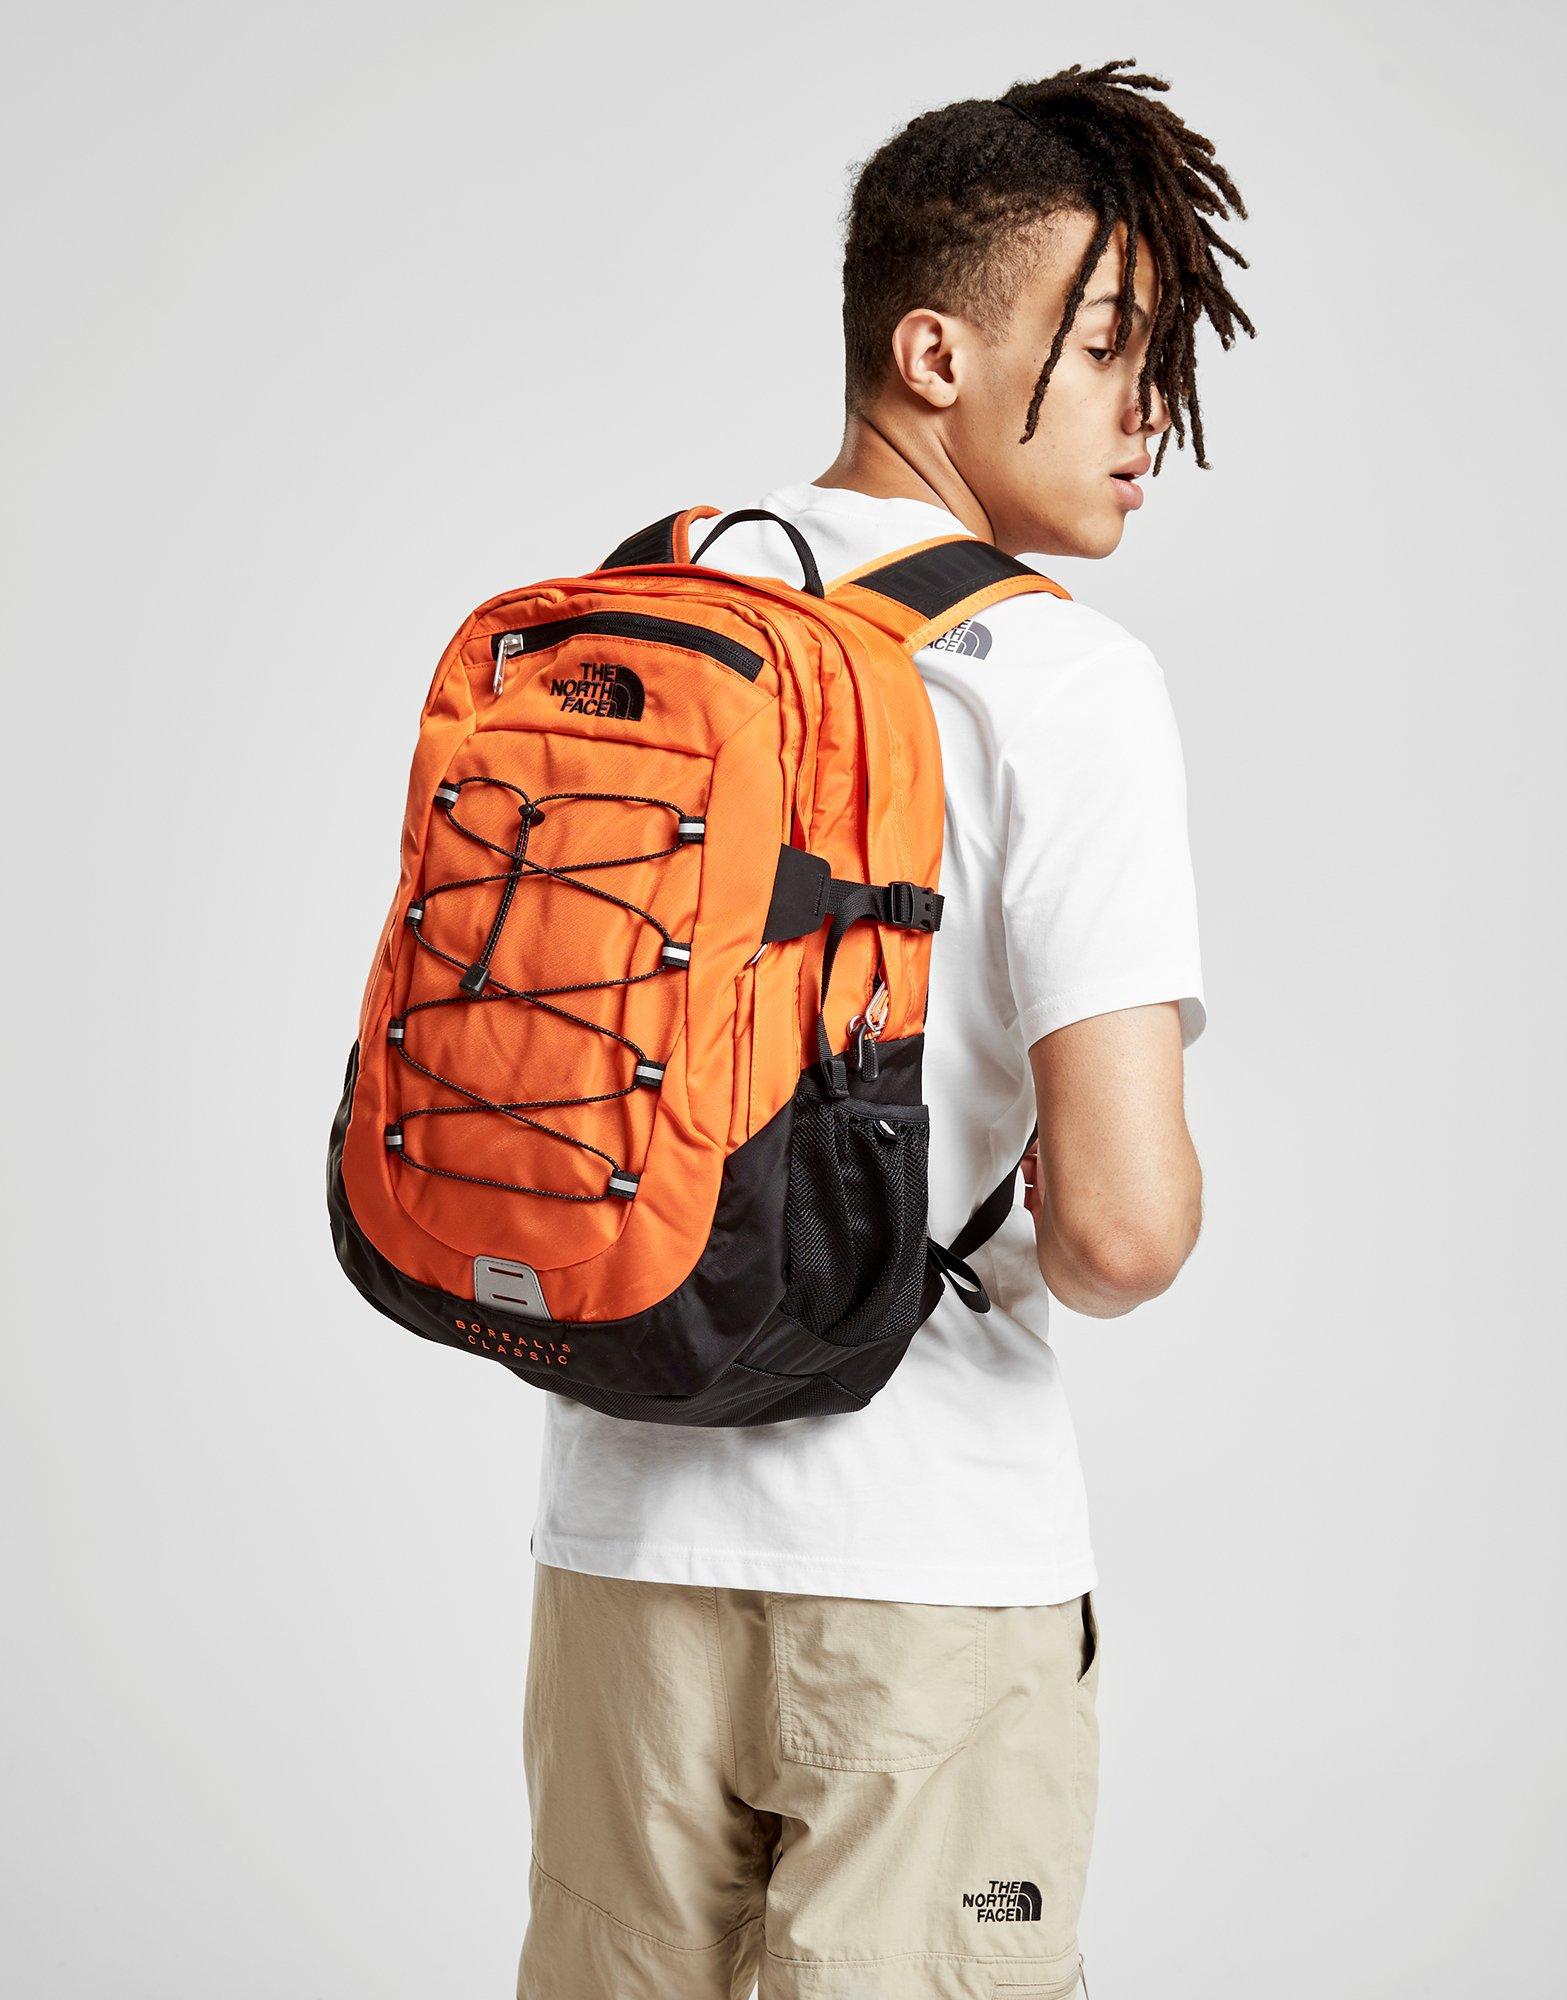 the north face orange backpack